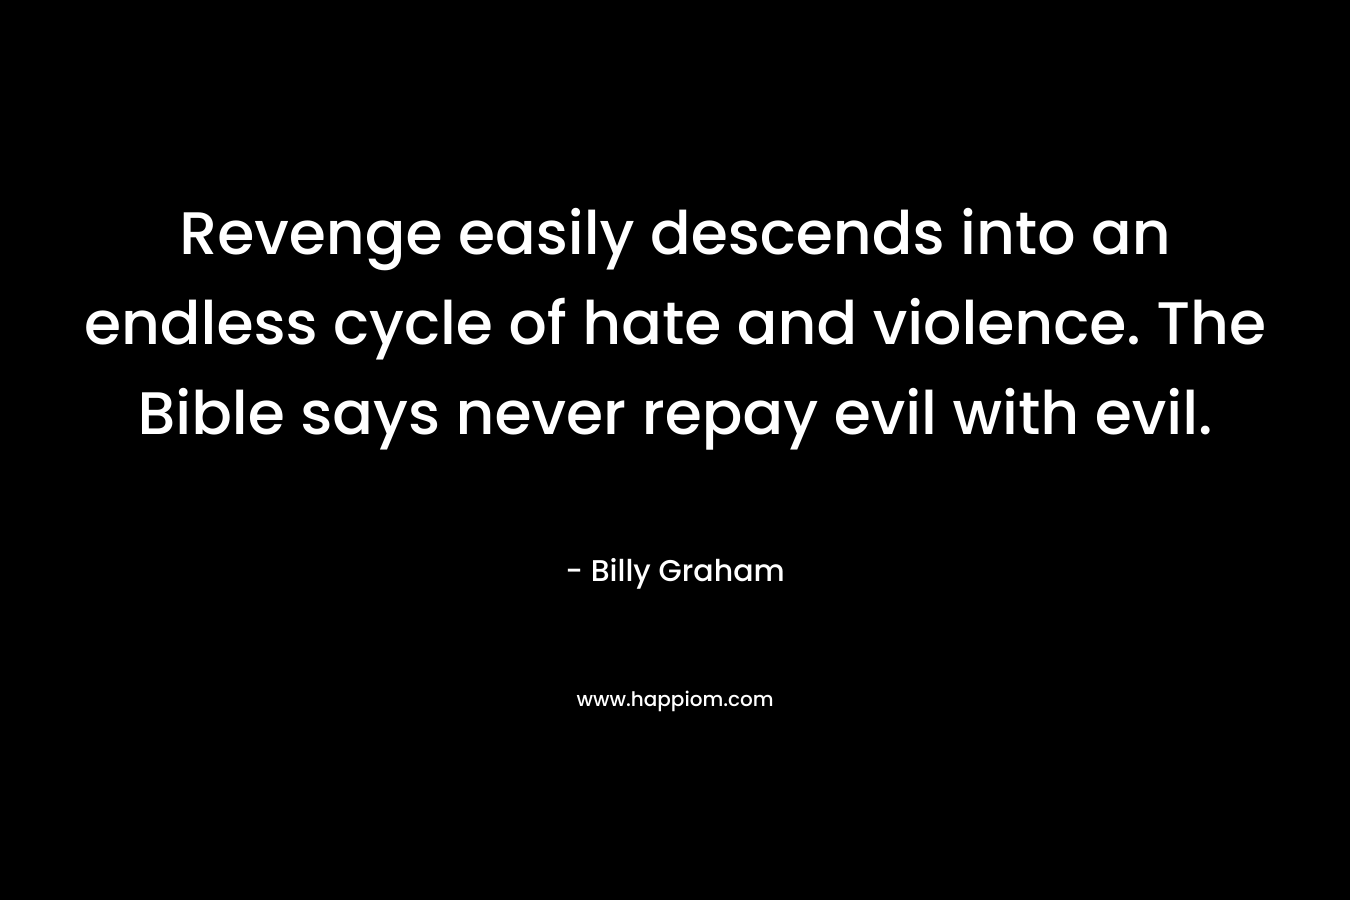 Revenge easily descends into an endless cycle of hate and violence. The Bible says never repay evil with evil.